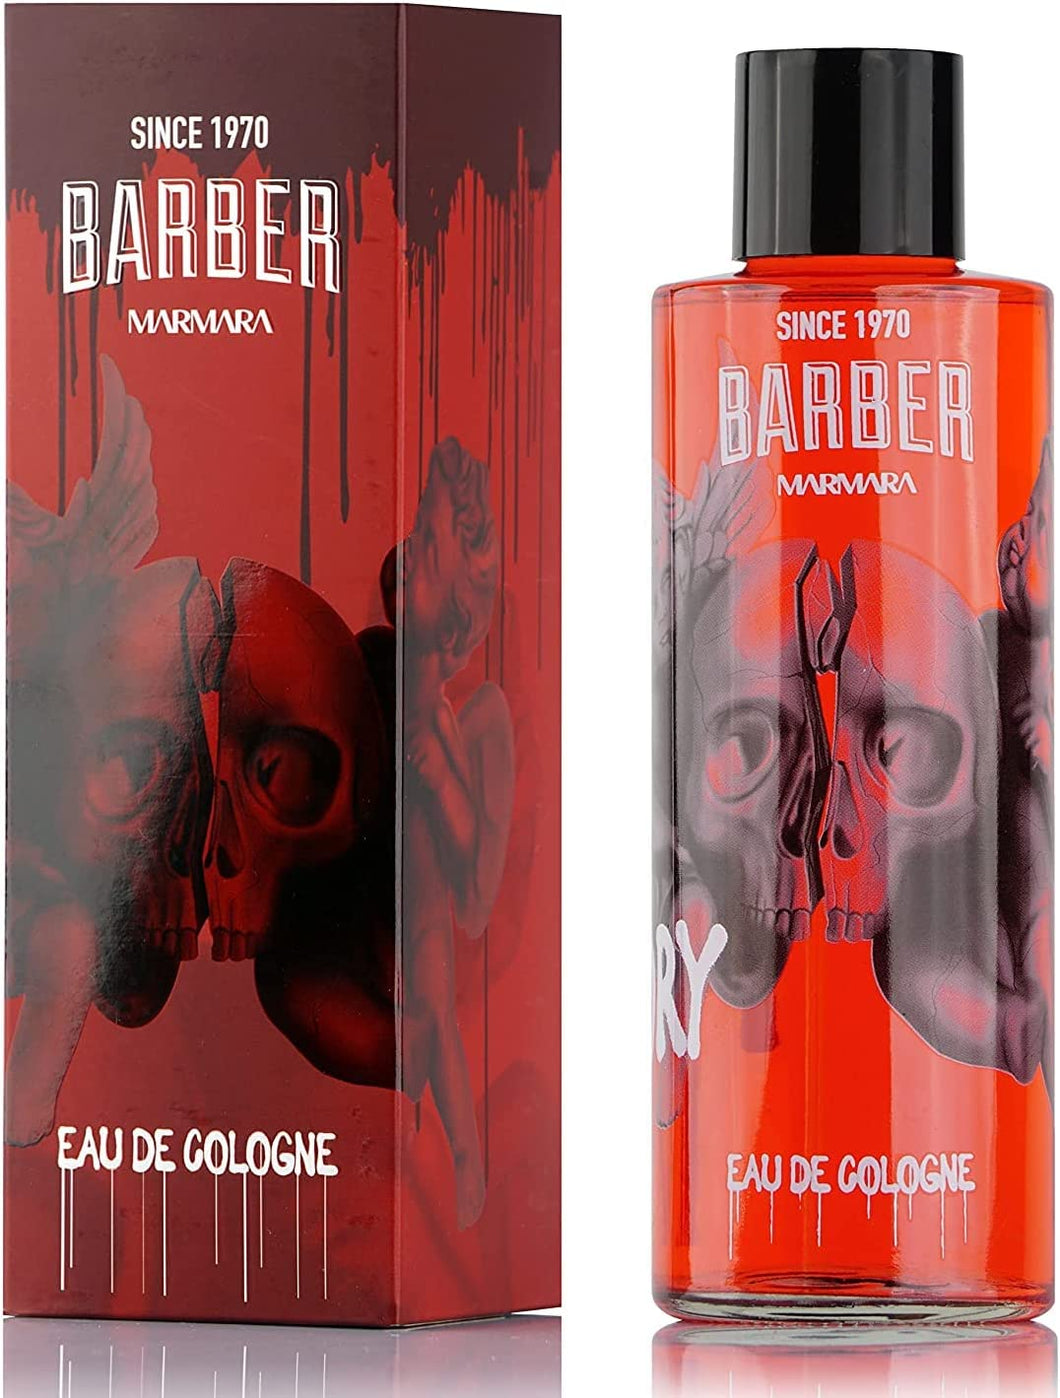 Marmara Barber Cologne - Best Choice of Modern Barbers and Traditional Shaving Fans - LOVE MEMORY Limited Edition Eau de Cologne - 16.90 Fl. Oz (500ml)